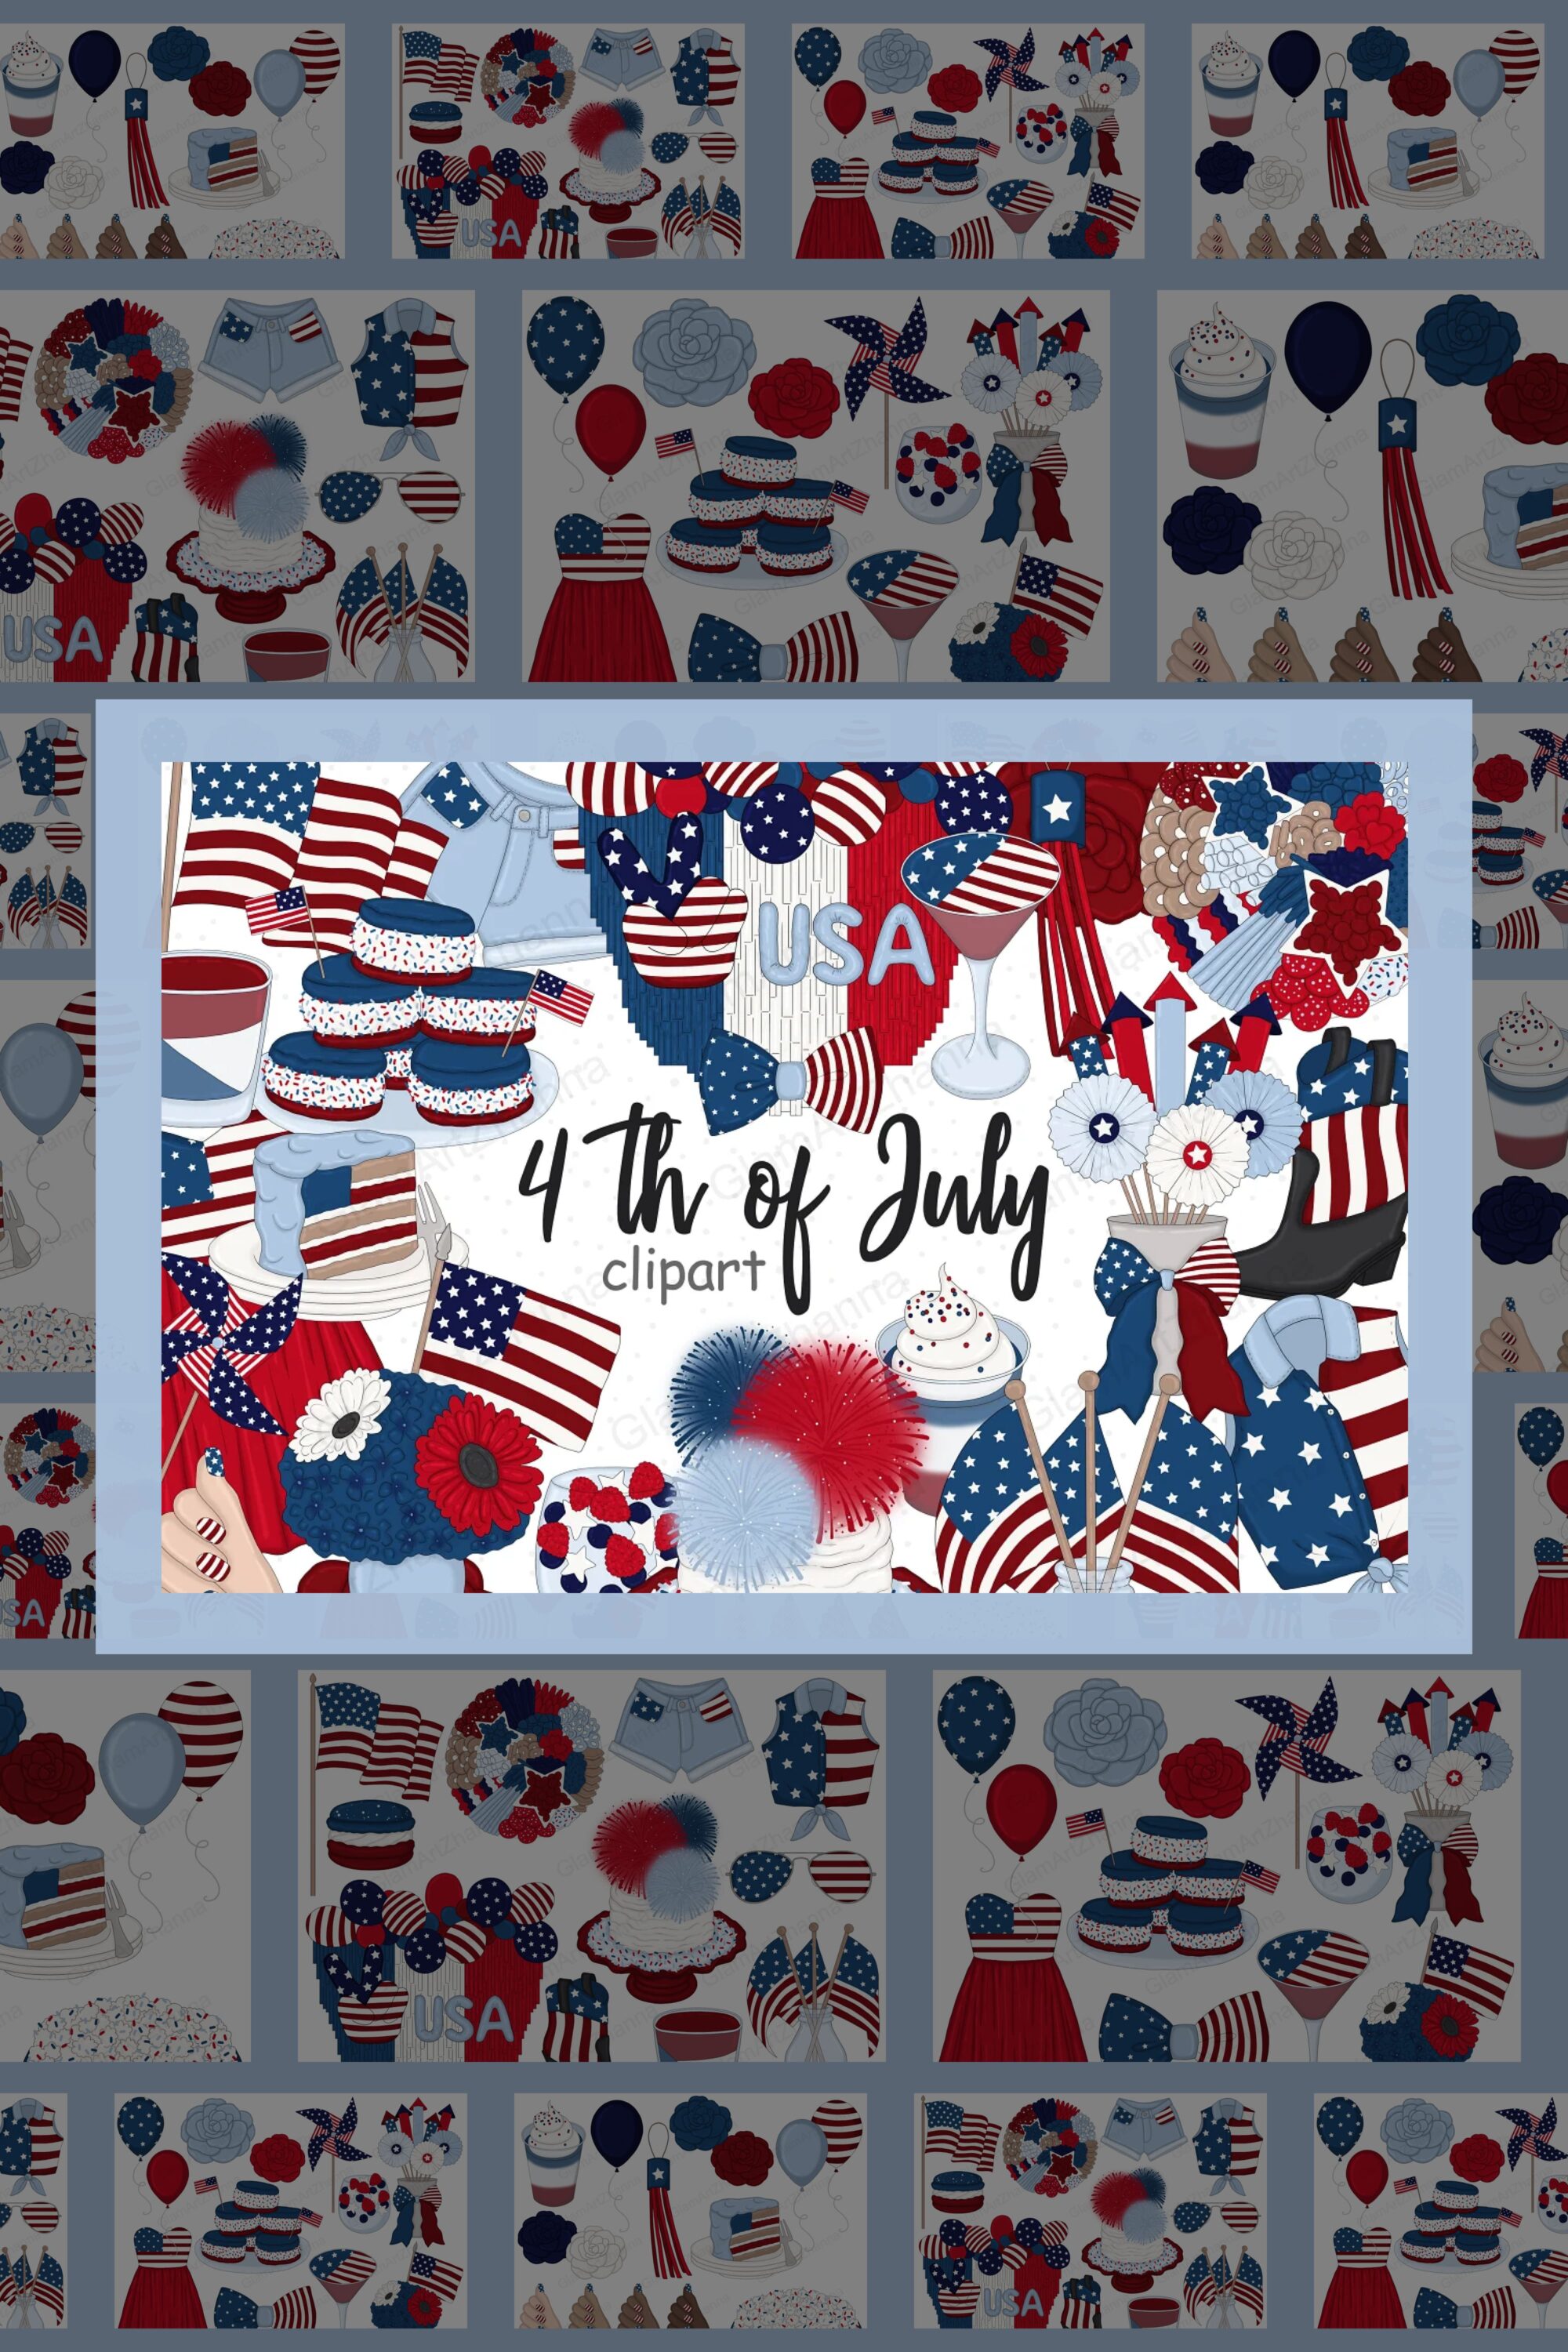 4th of July Dark Clipart pinterest image.